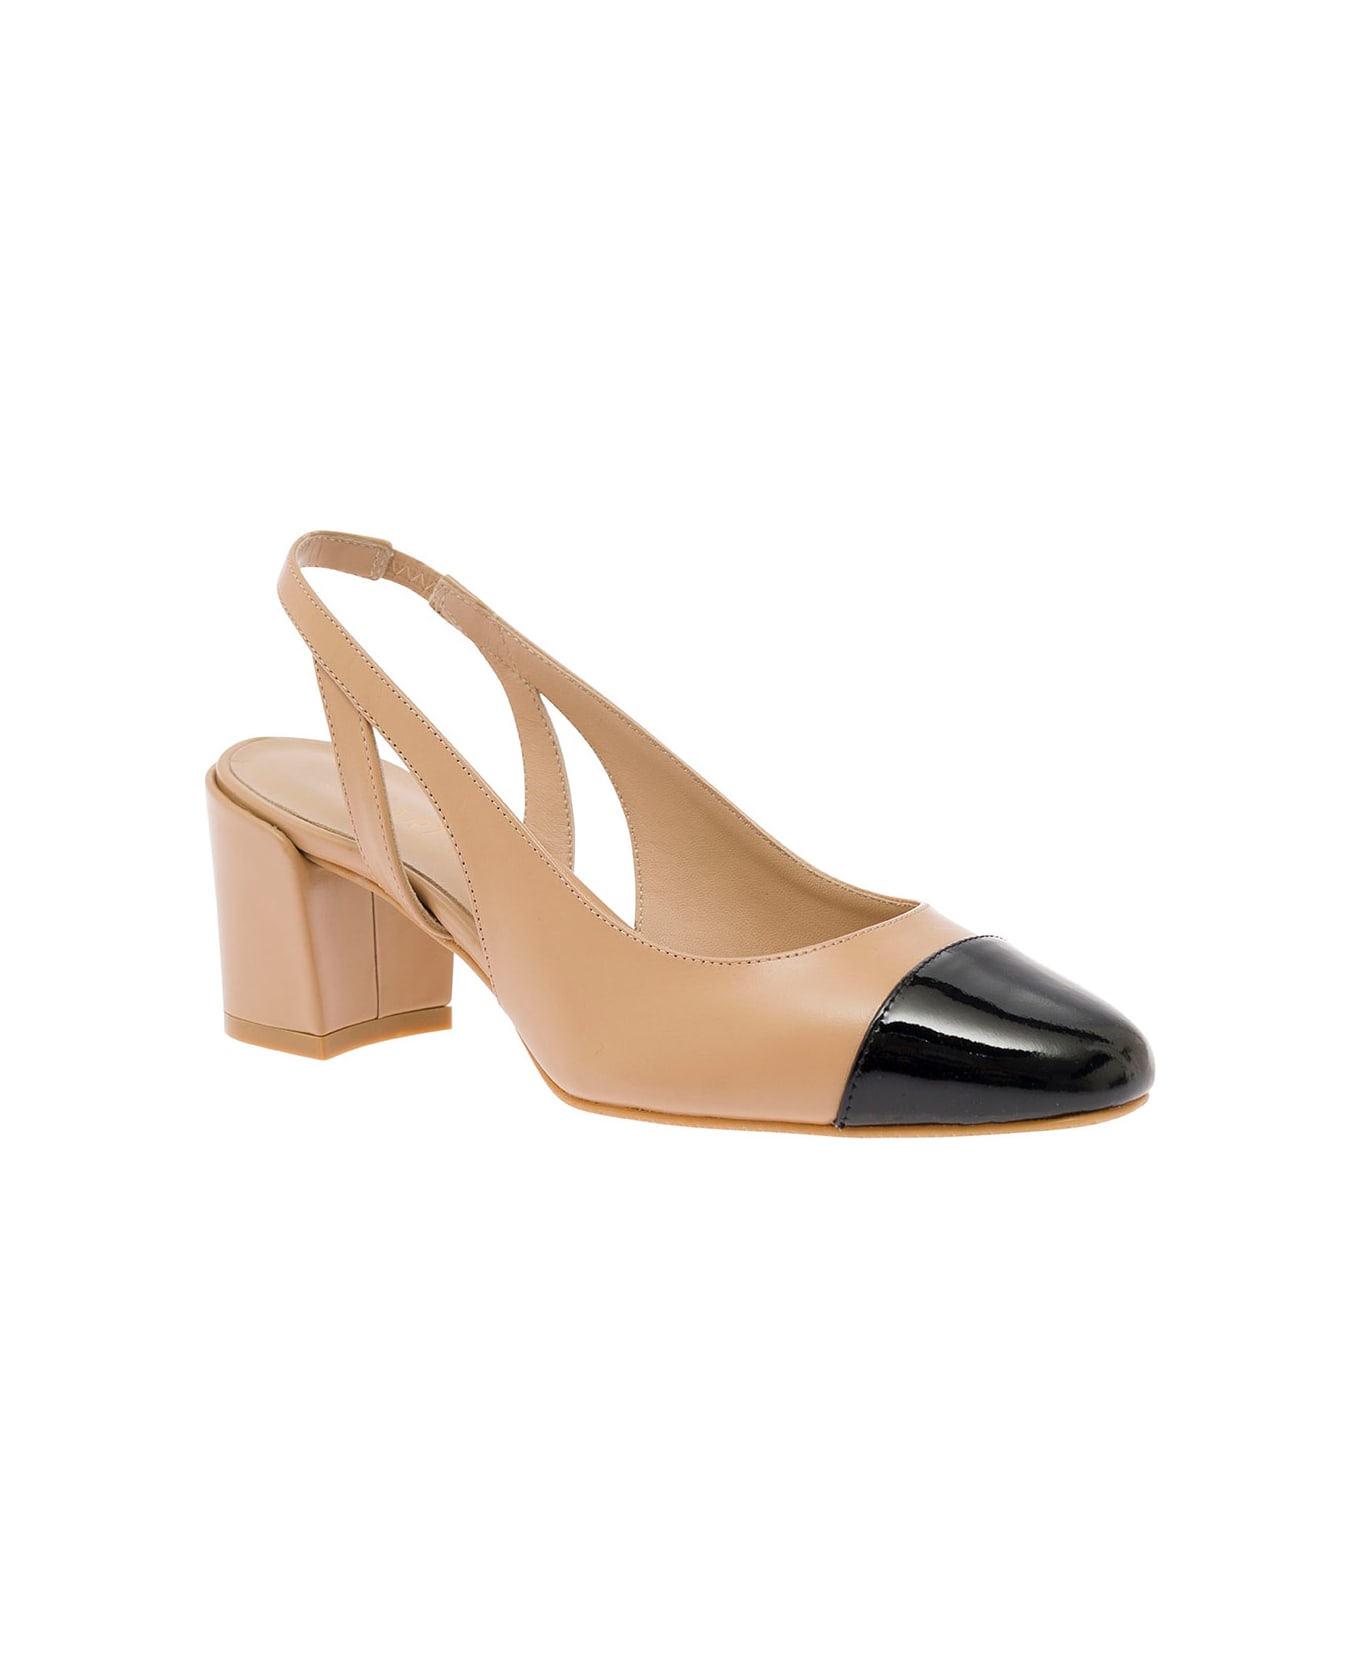 Stuart Weitzman Beige Slingback With Contrasting Toe In Smooth Leather Woman - Beige